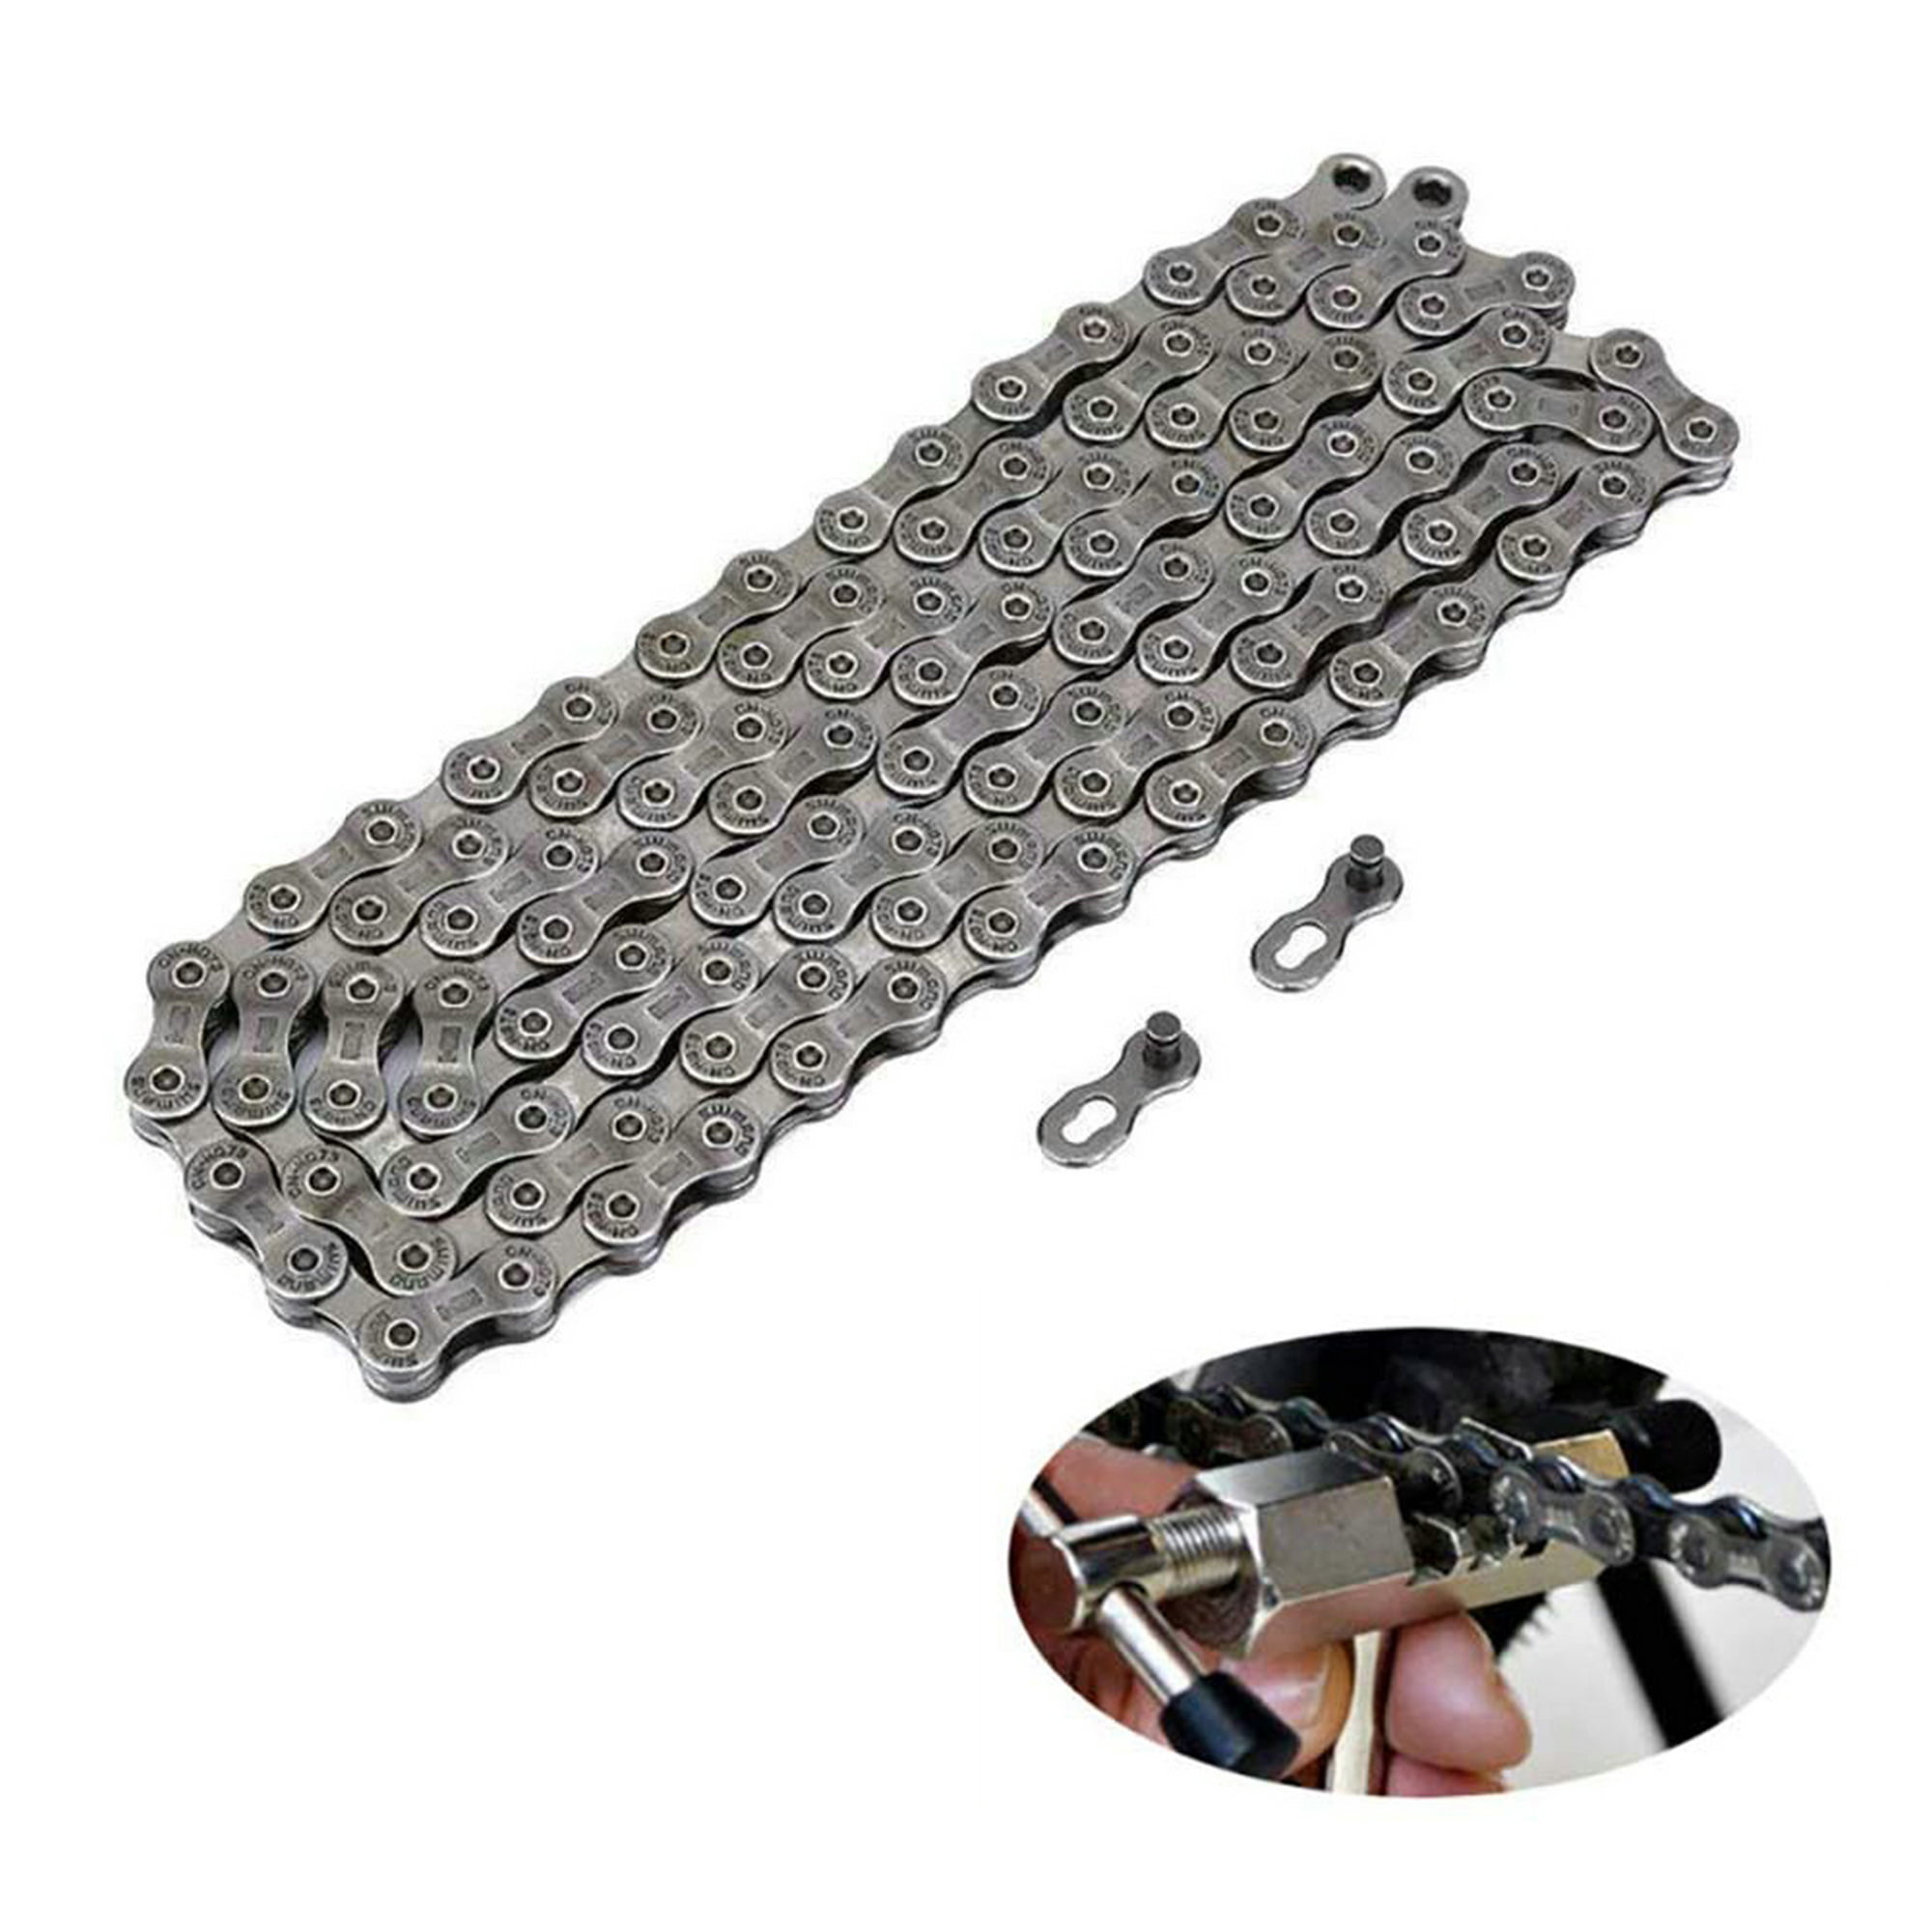 Details about   9 Speed Steel Bicycle Chain For Deore LX 105 Gear Mountain Biker Road Cycle US 